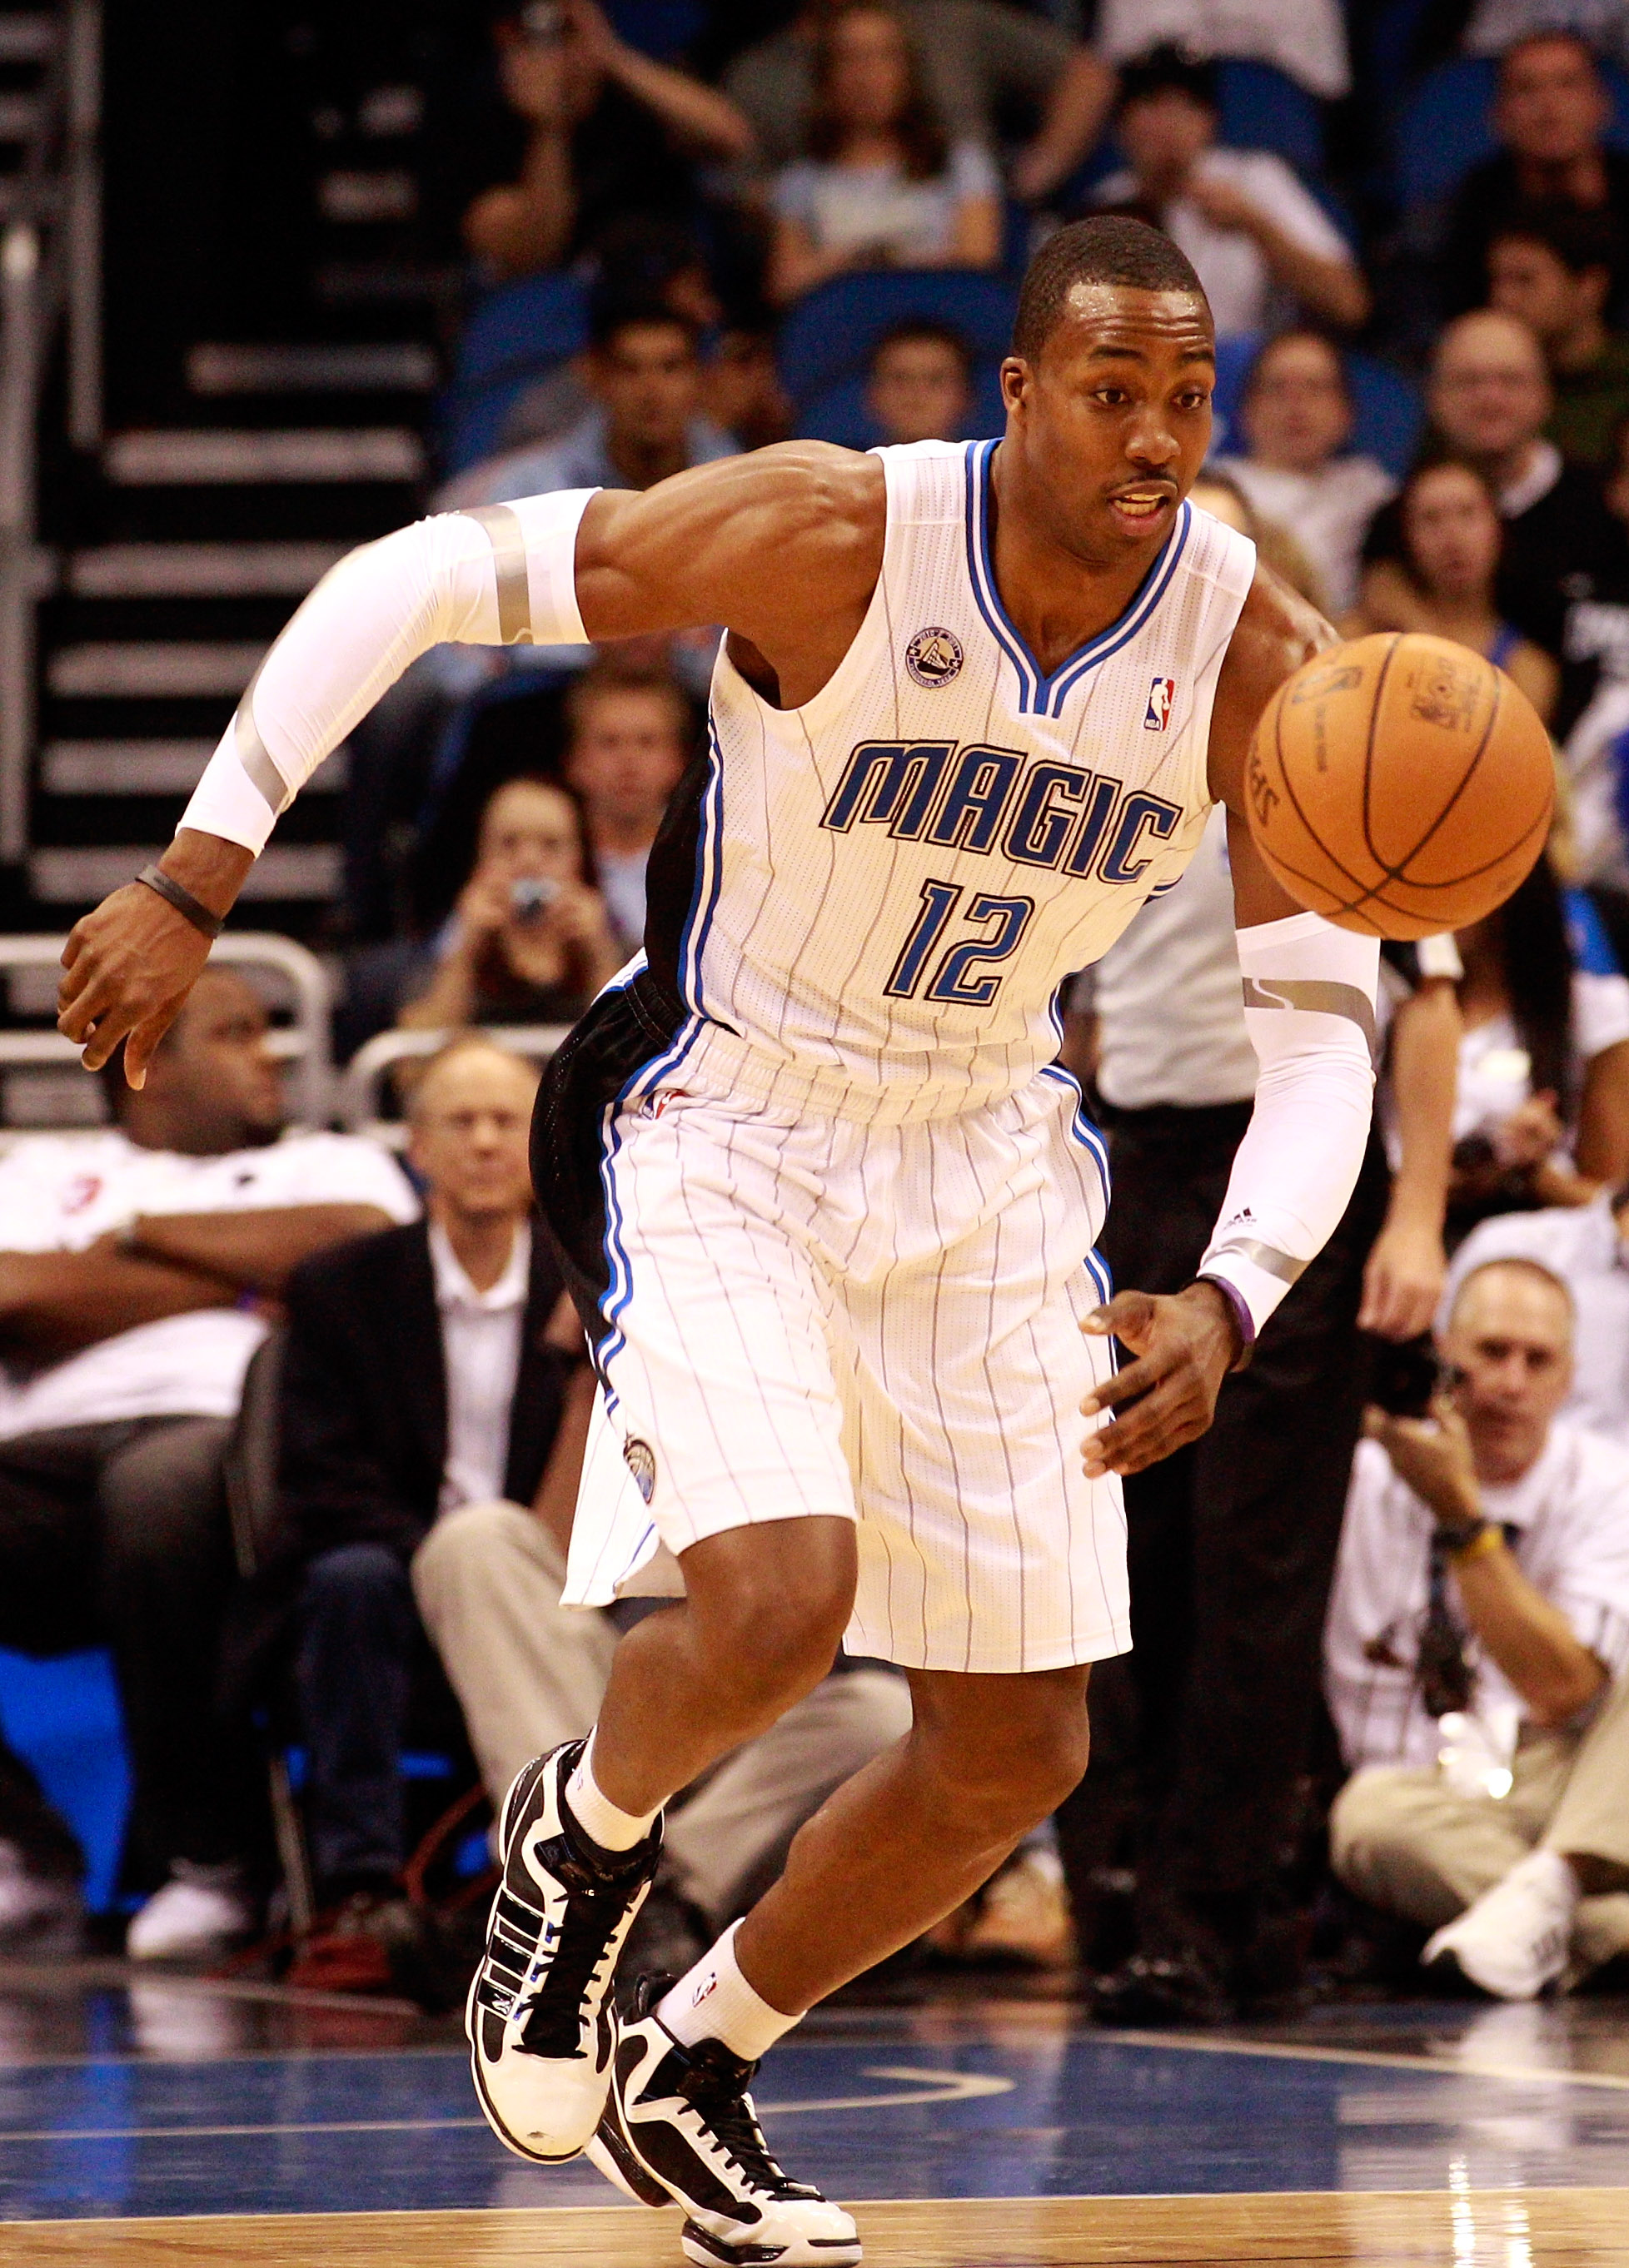 ORLANDO, FL - DECEMBER 18:  Dwight Howard #12 of the Orlando Magic chases down a loose ball during the game against the Philadelphia 76ers at Amway Arena on December 18, 2010 in Orlando, Florida.  NOTE TO USER: User expressly acknowledges and agrees that,